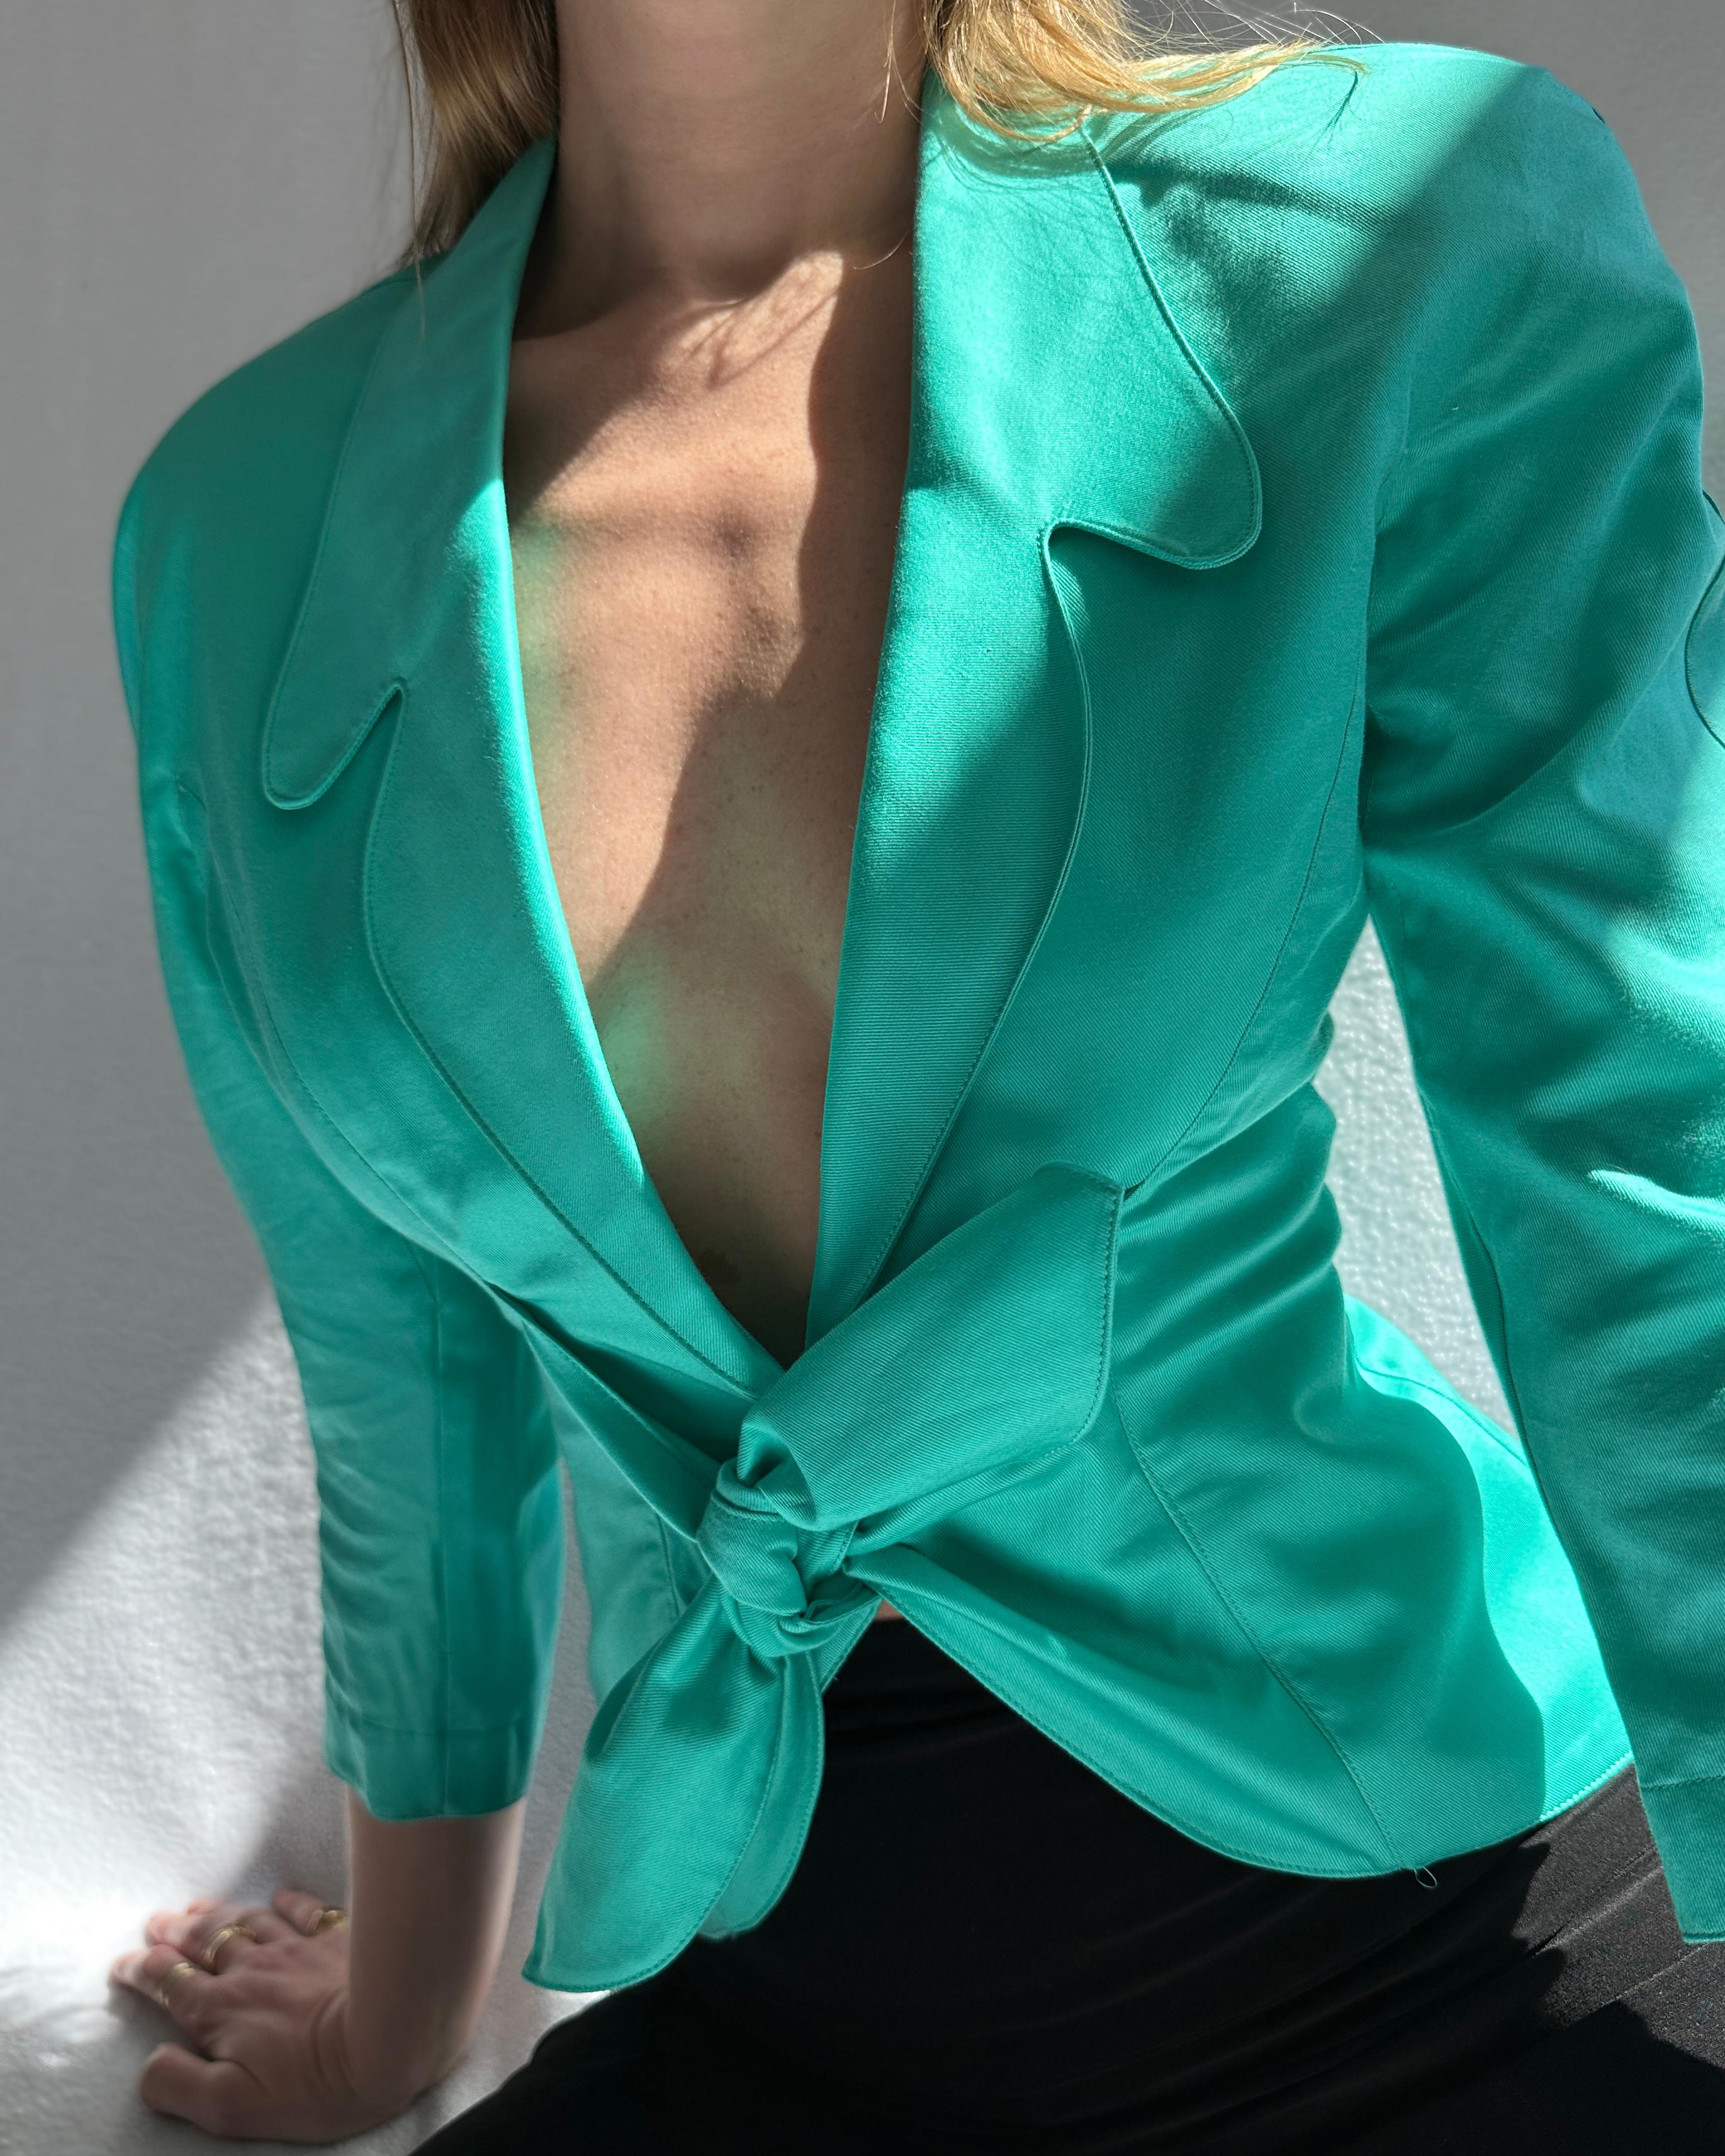 VERY BREEZY presents:  This vintage Thierry Mugler jacket is a serious investment piece, in a shape that's classic Mugler yet very rare to find. Circa late 1980s, the exaggerated nipped waist, dramatic lapels, and mermaid-green hue are signatures of